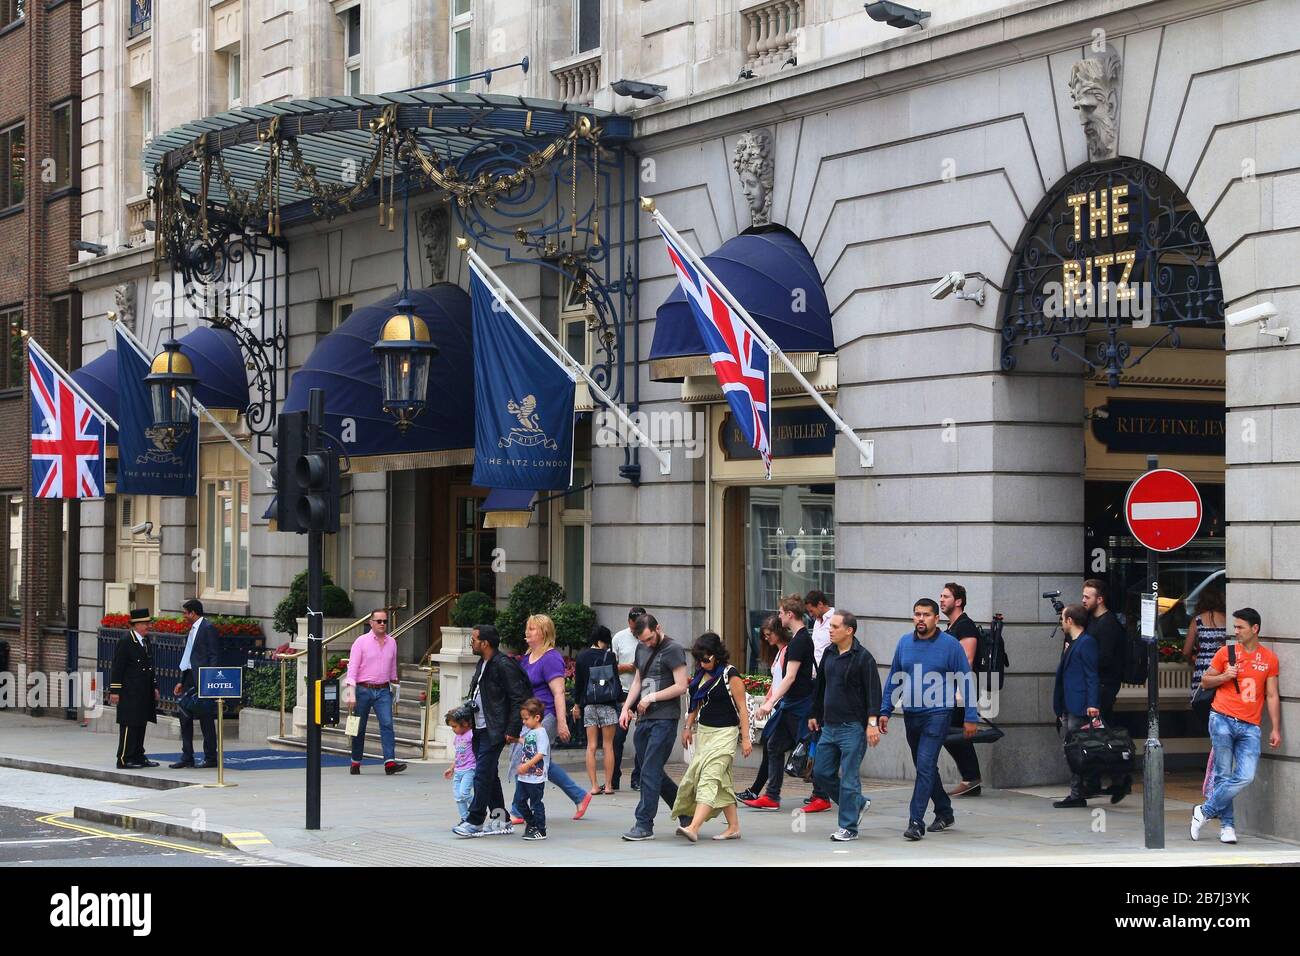 LONDON, UK - JULY 9, 2016: The Ritz luxury hotel in London, UK. The hotel is located in Piccadilly. It's owned by Ellerman Group. Stock Photo